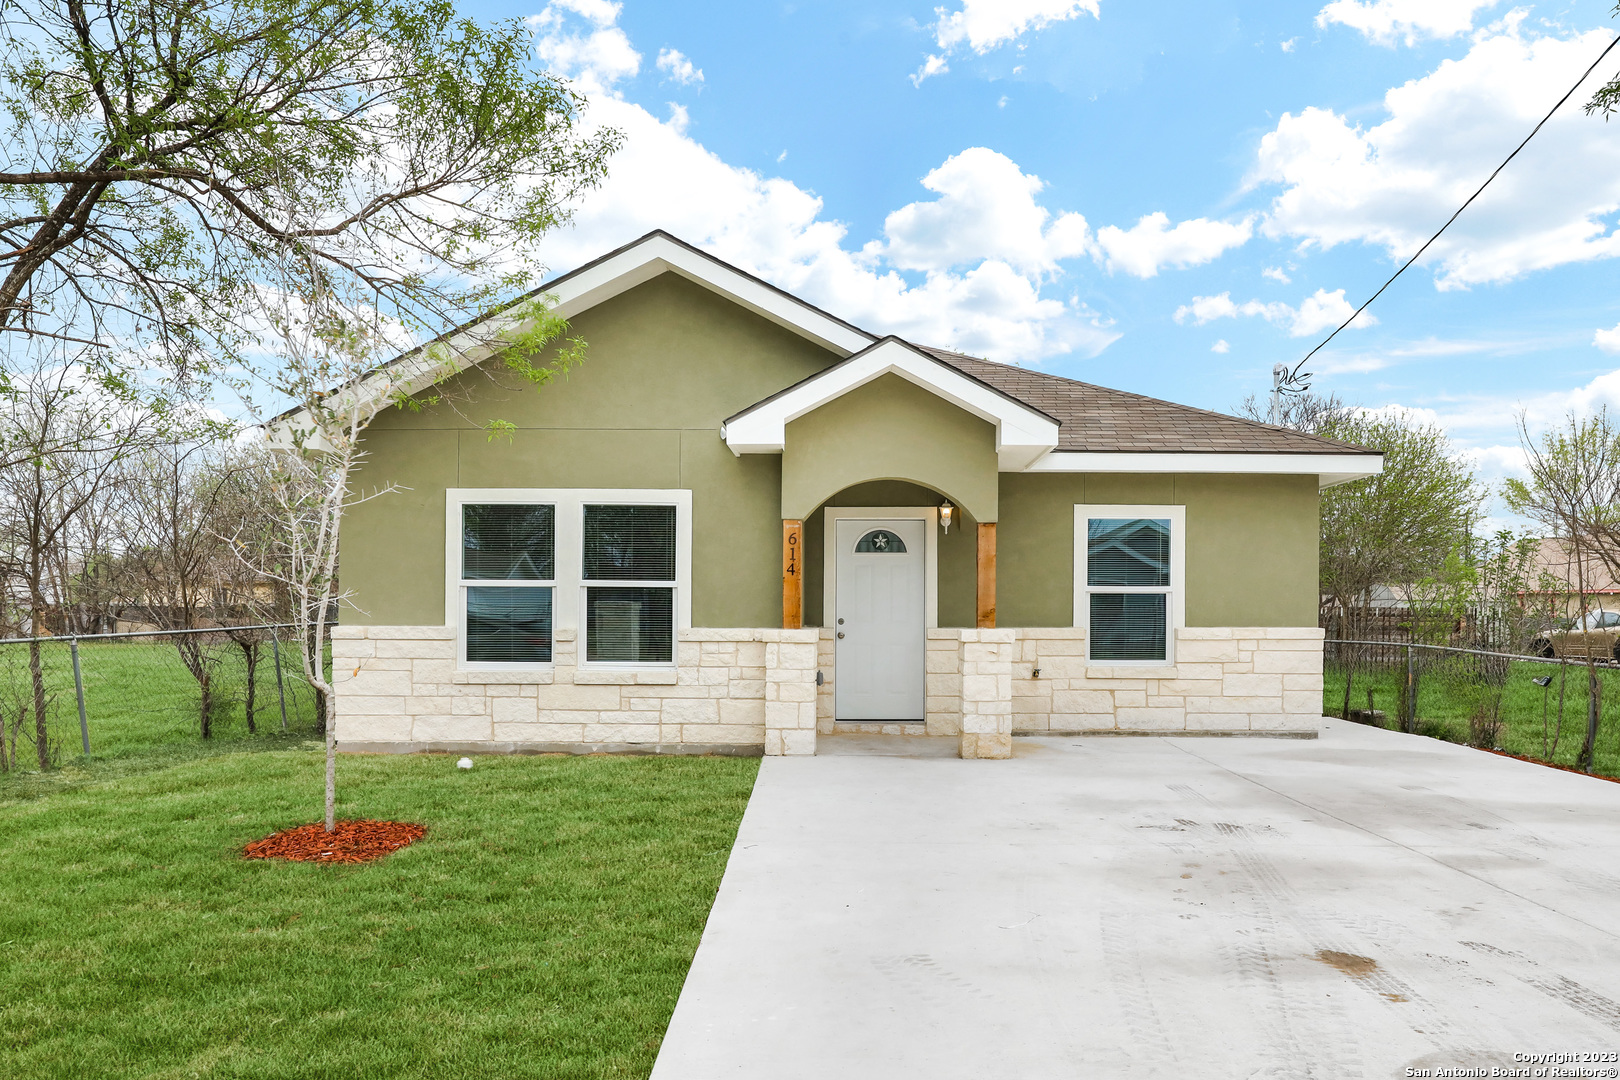 Beautiful new construction home with a huge backyard. Don't miss the opportunity to see this amazing home.